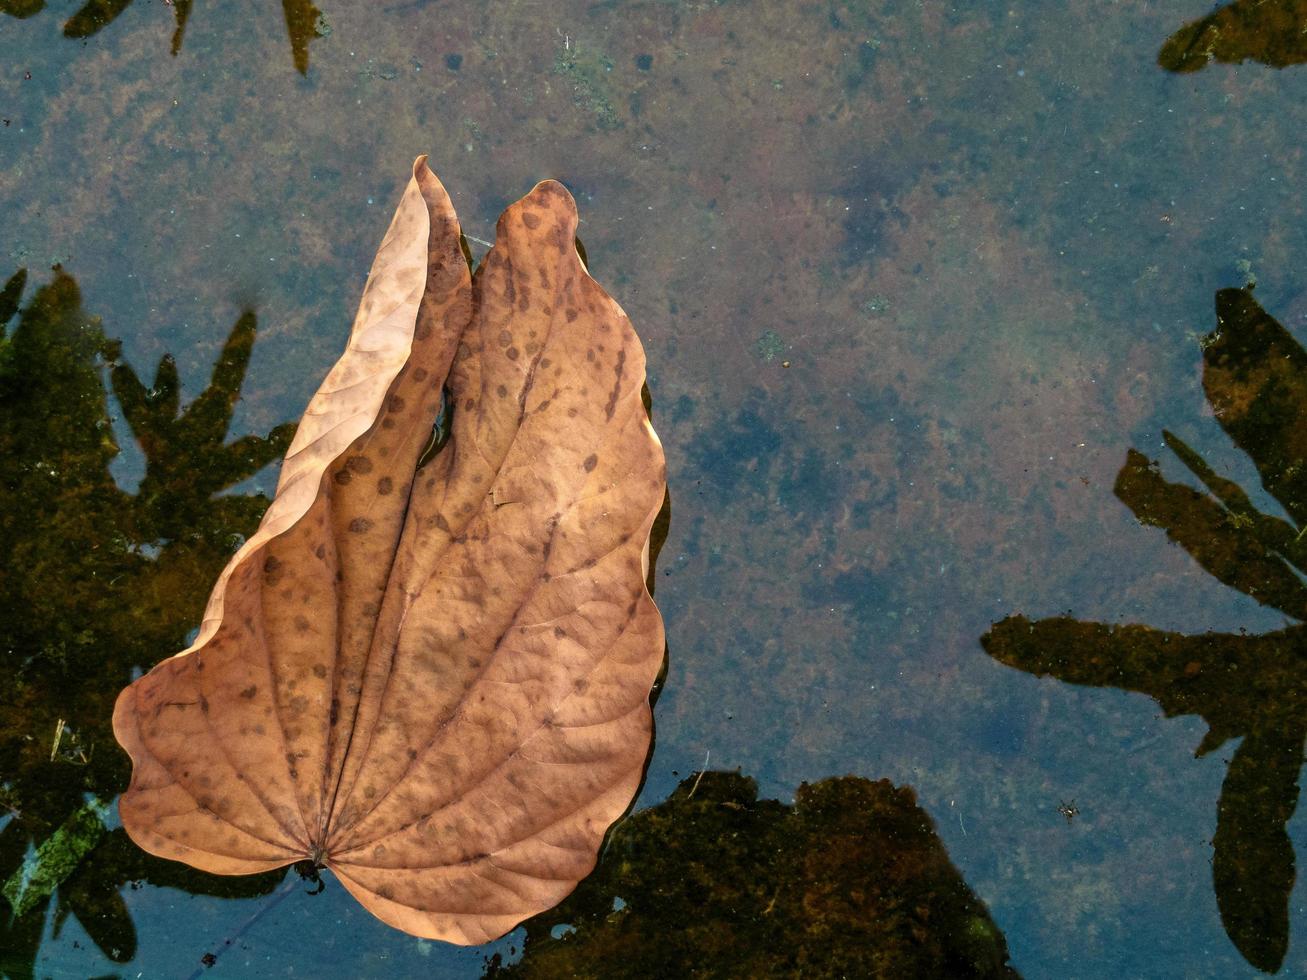 close-up of dry leaf on calm water surface photo